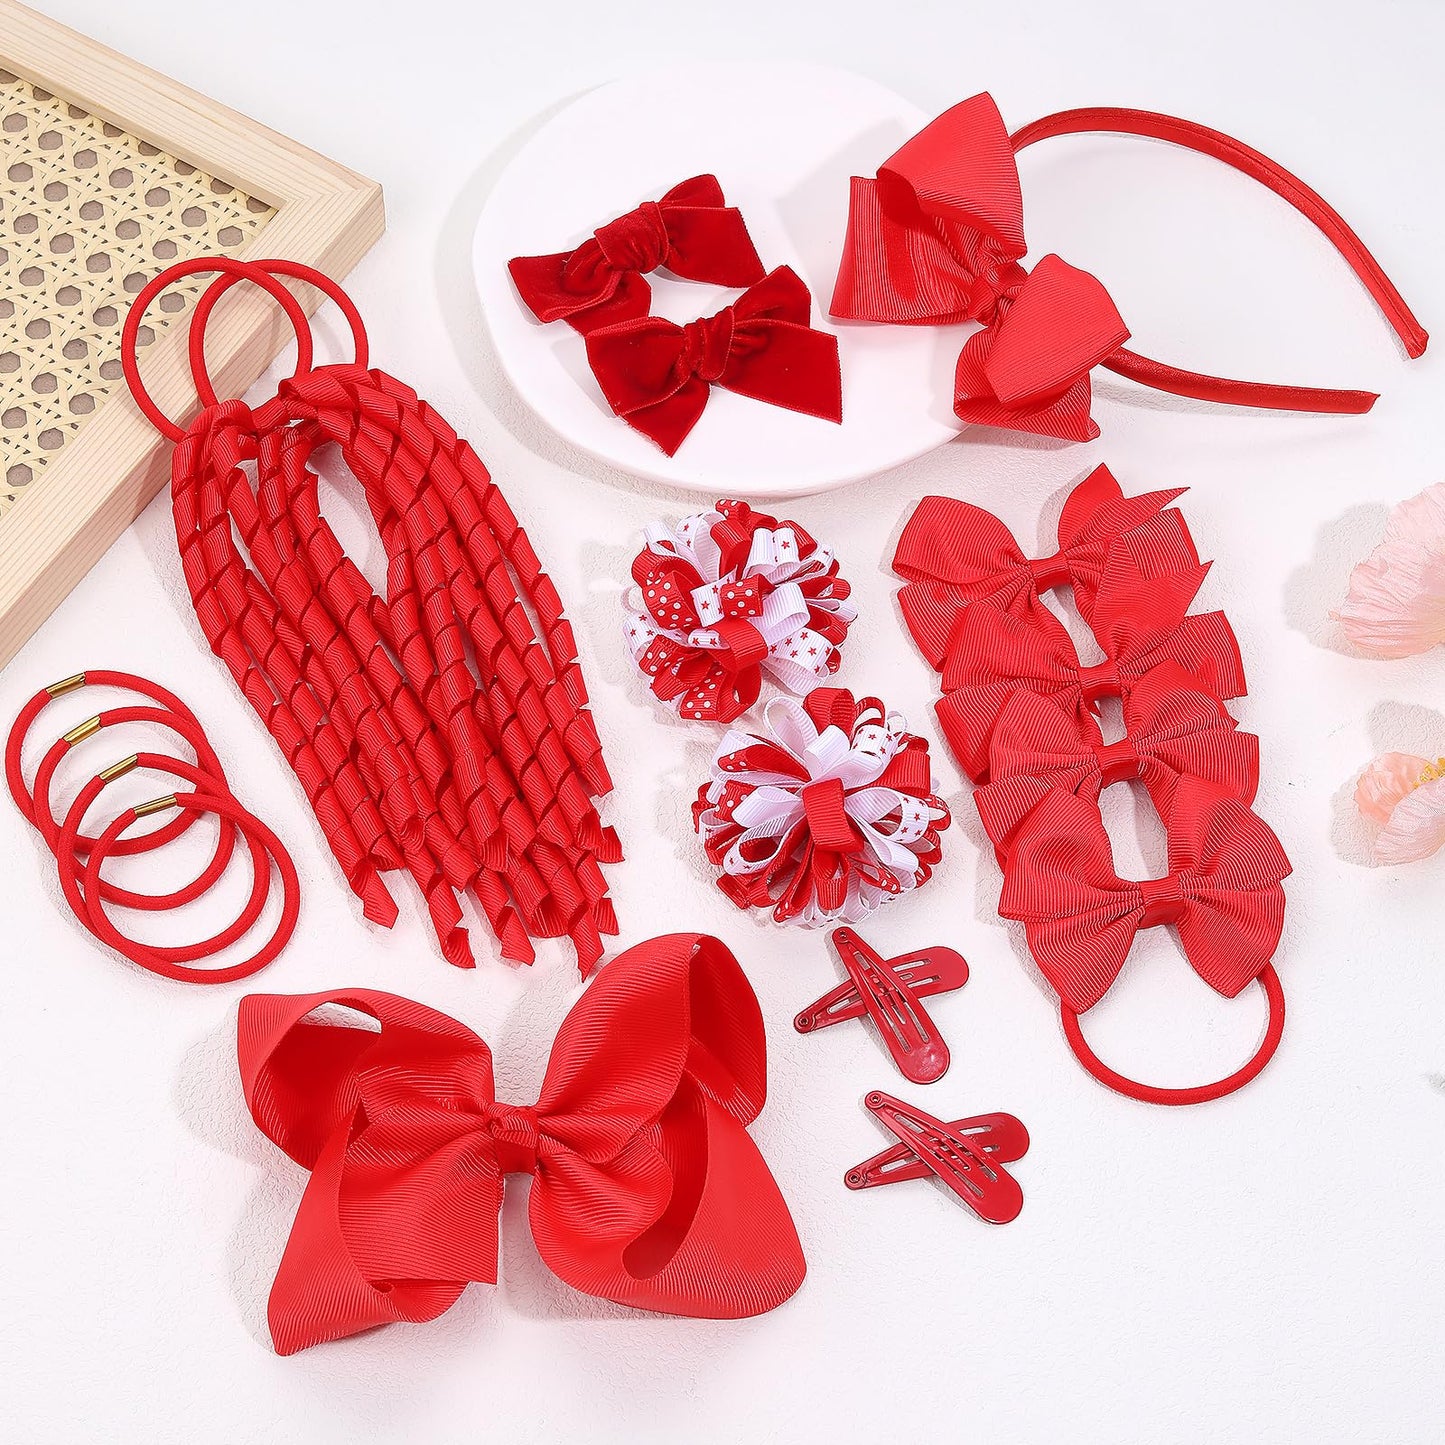 CN 20PCS Red Hair Bows for Girls, Bow Hair Clips Headband Hair Ties Hair Barrettes Ponytail Holders Curly Koker Bows Hair Accessories School Uniform Set for Little Girls Teens Toddler